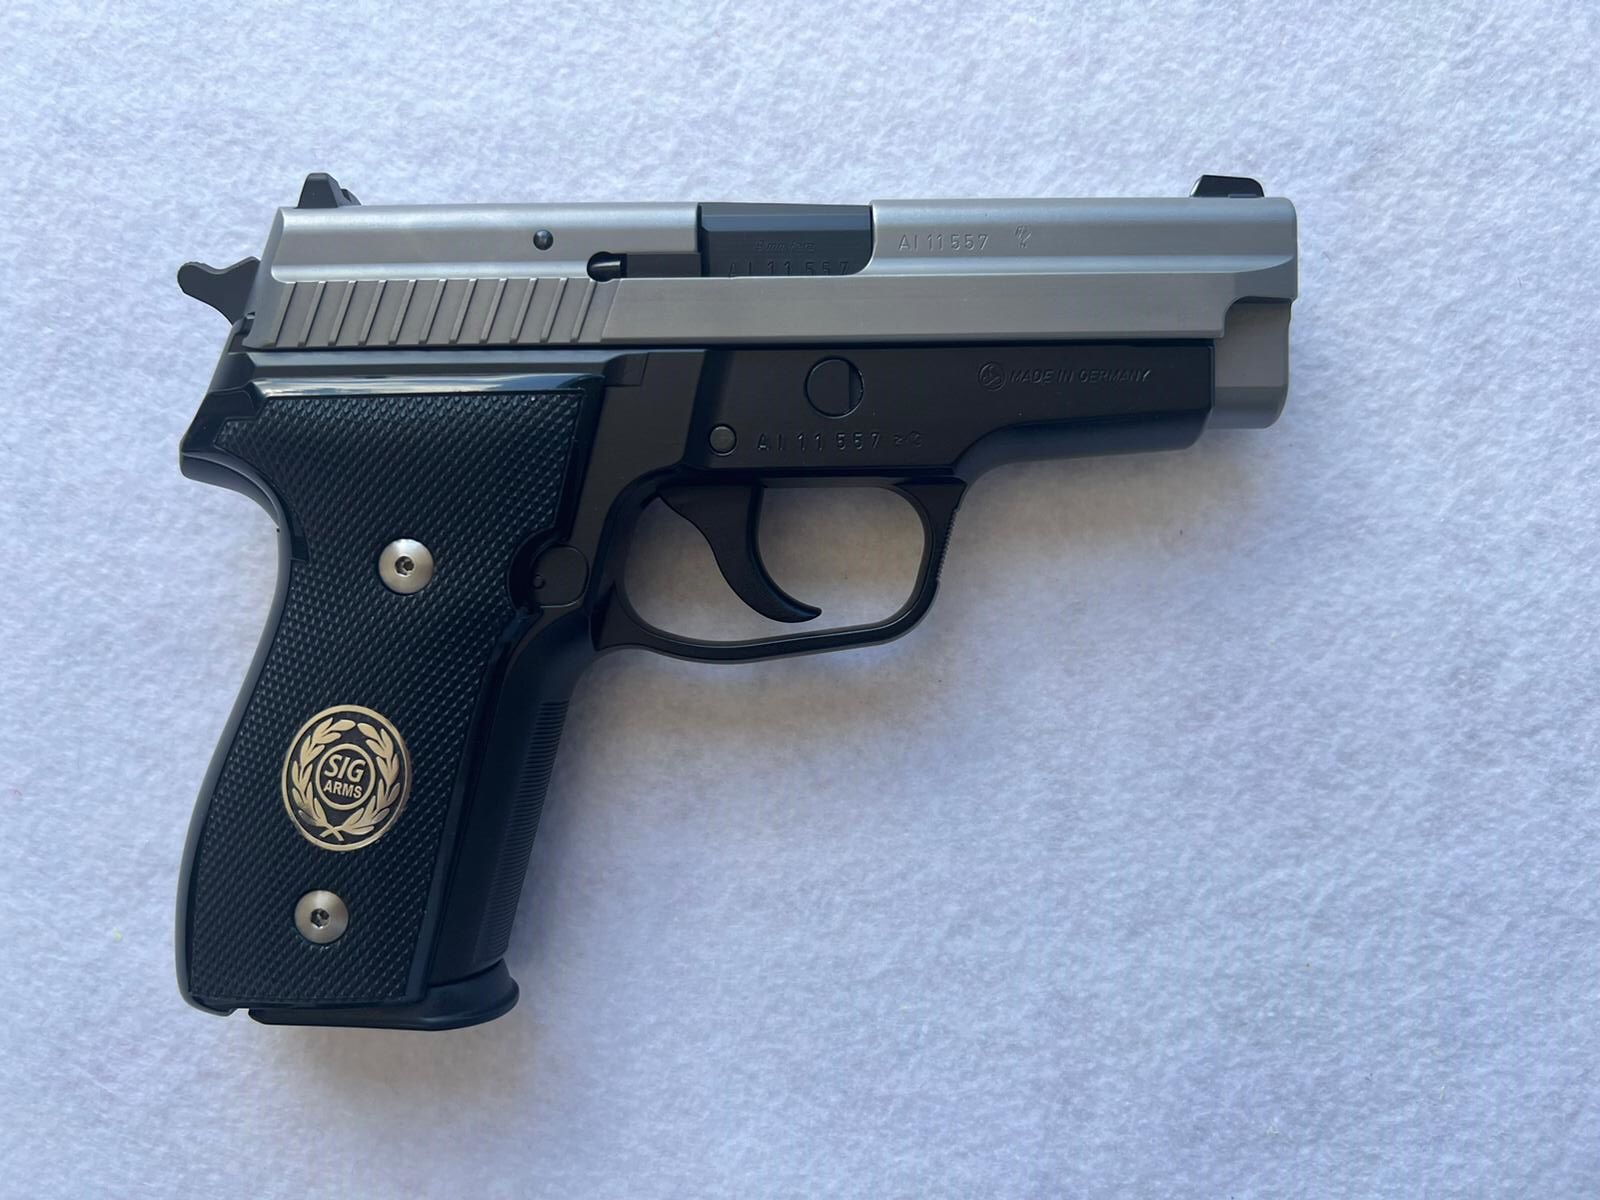 SİG SAUER P 229 TWO TONE GERMANY